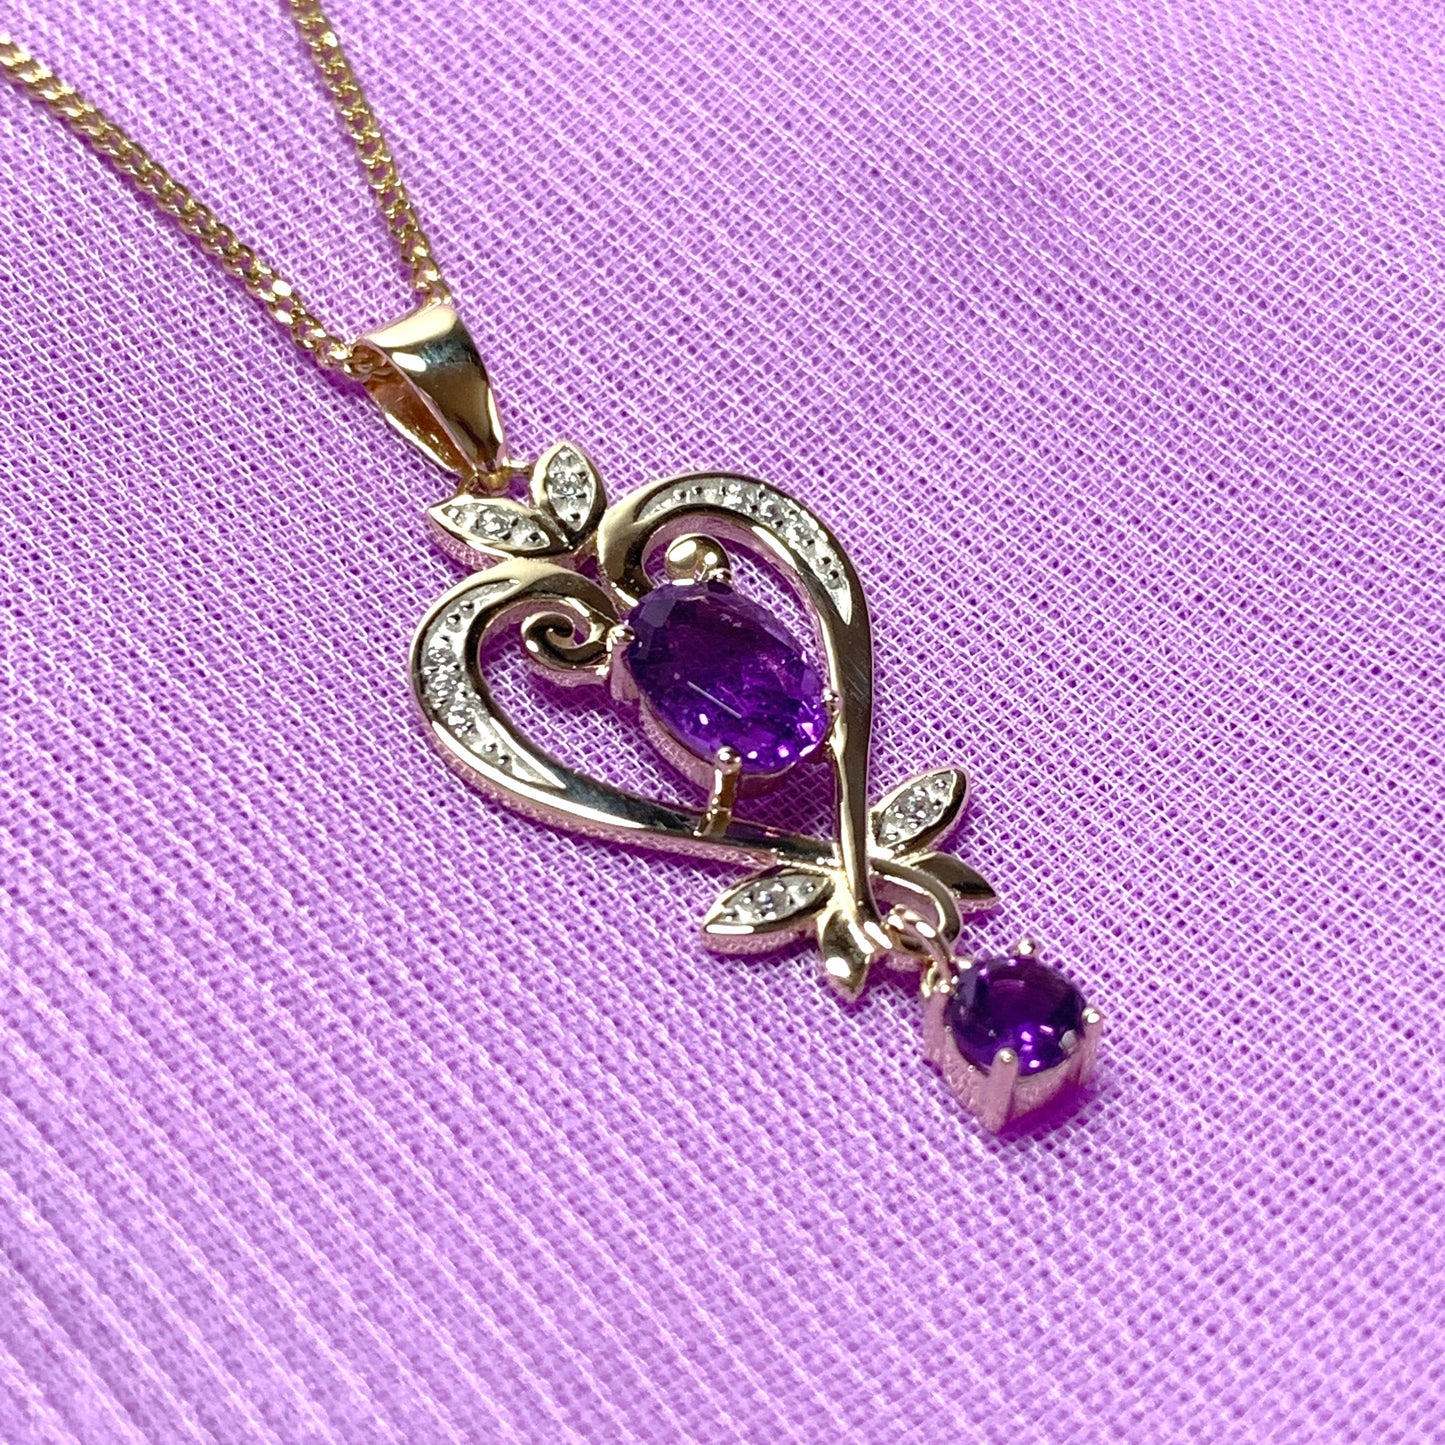 Heart shaped yellow gold and amethyst necklace pendent